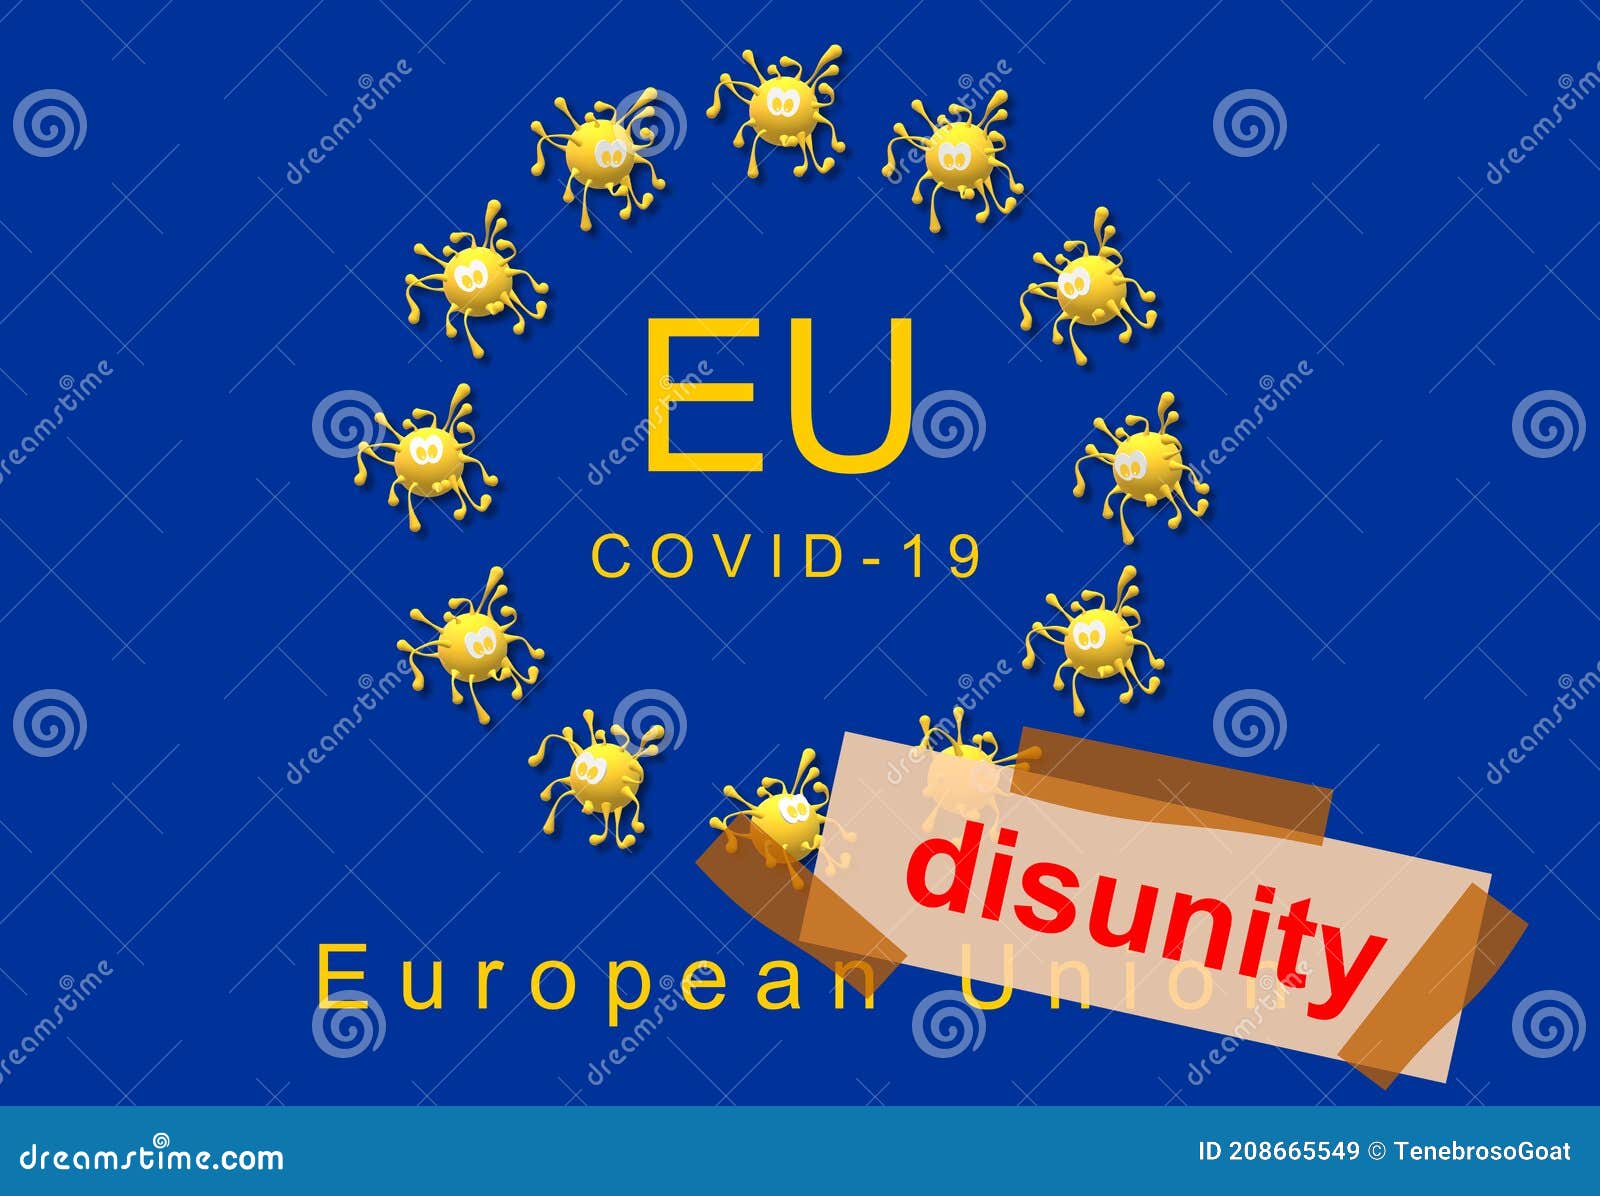 disunity  advertisement with gummed paper tape. eu   official colors of the flag. cartoon. pandemic covid-19.